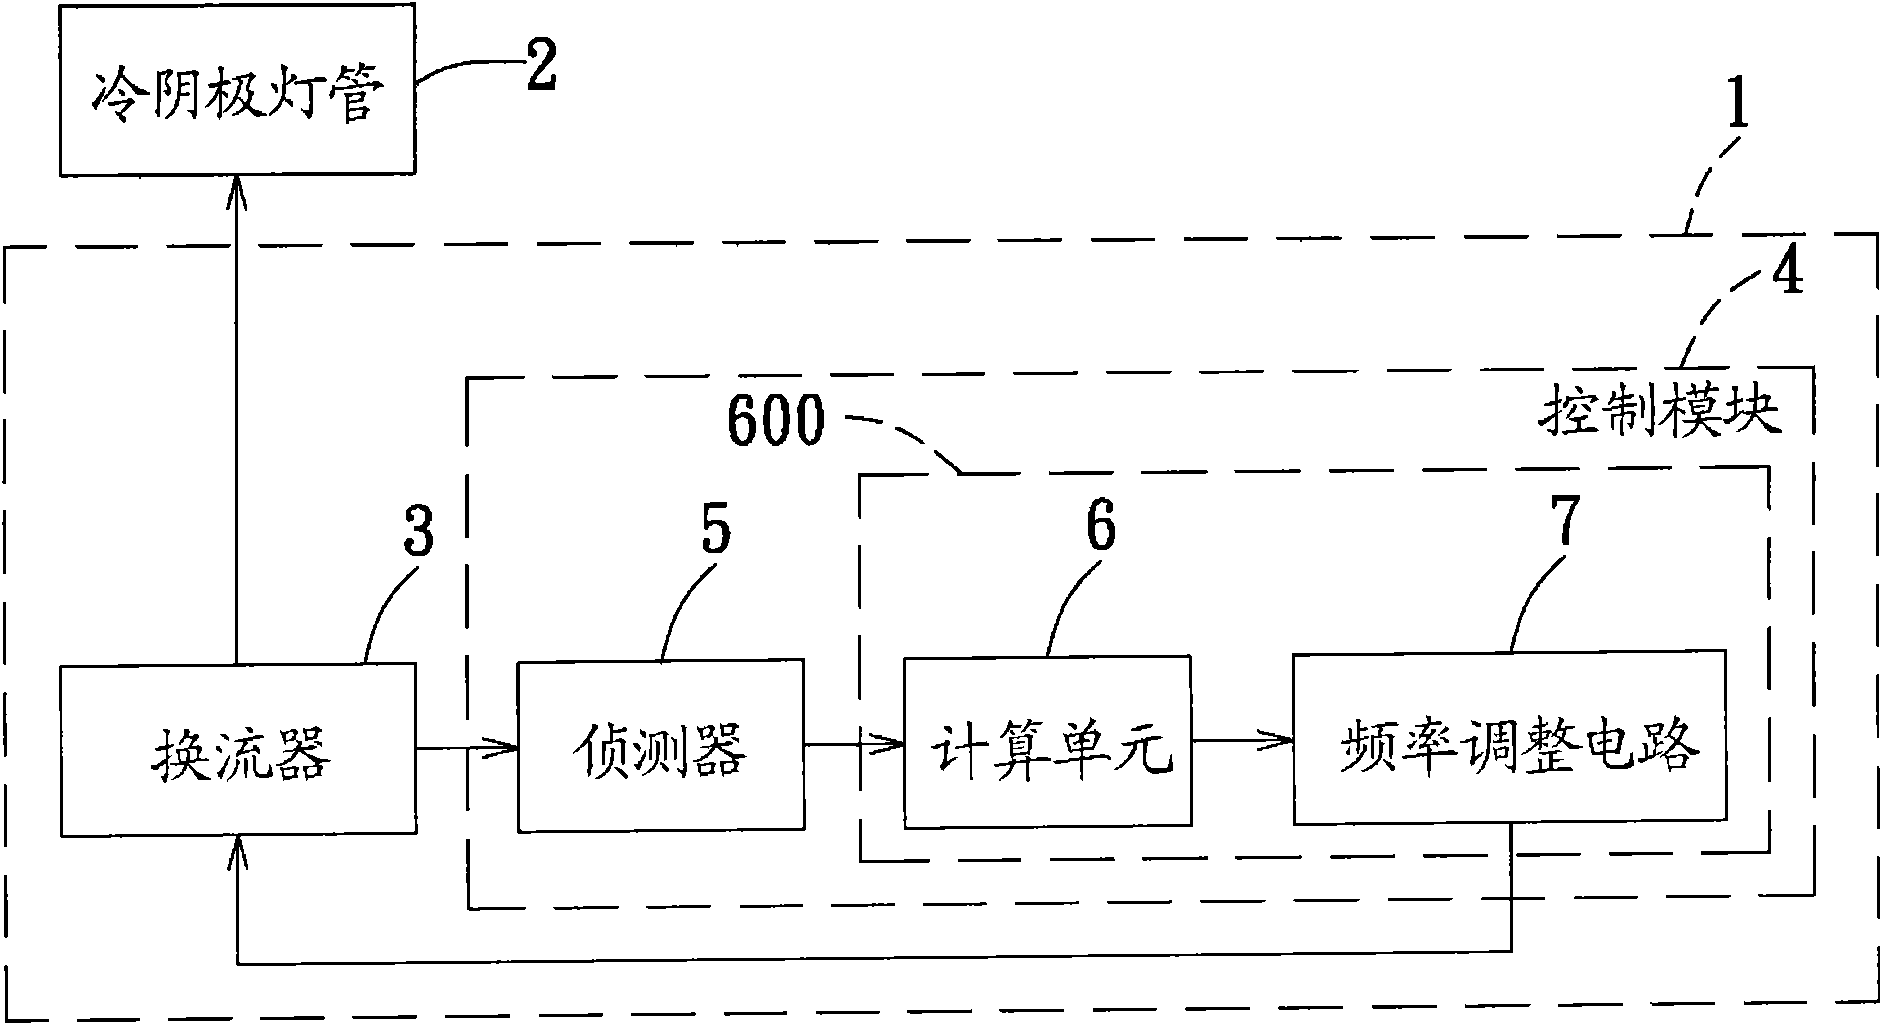 Cold cathode florescent lamp converter, control method thereof and control module thereof